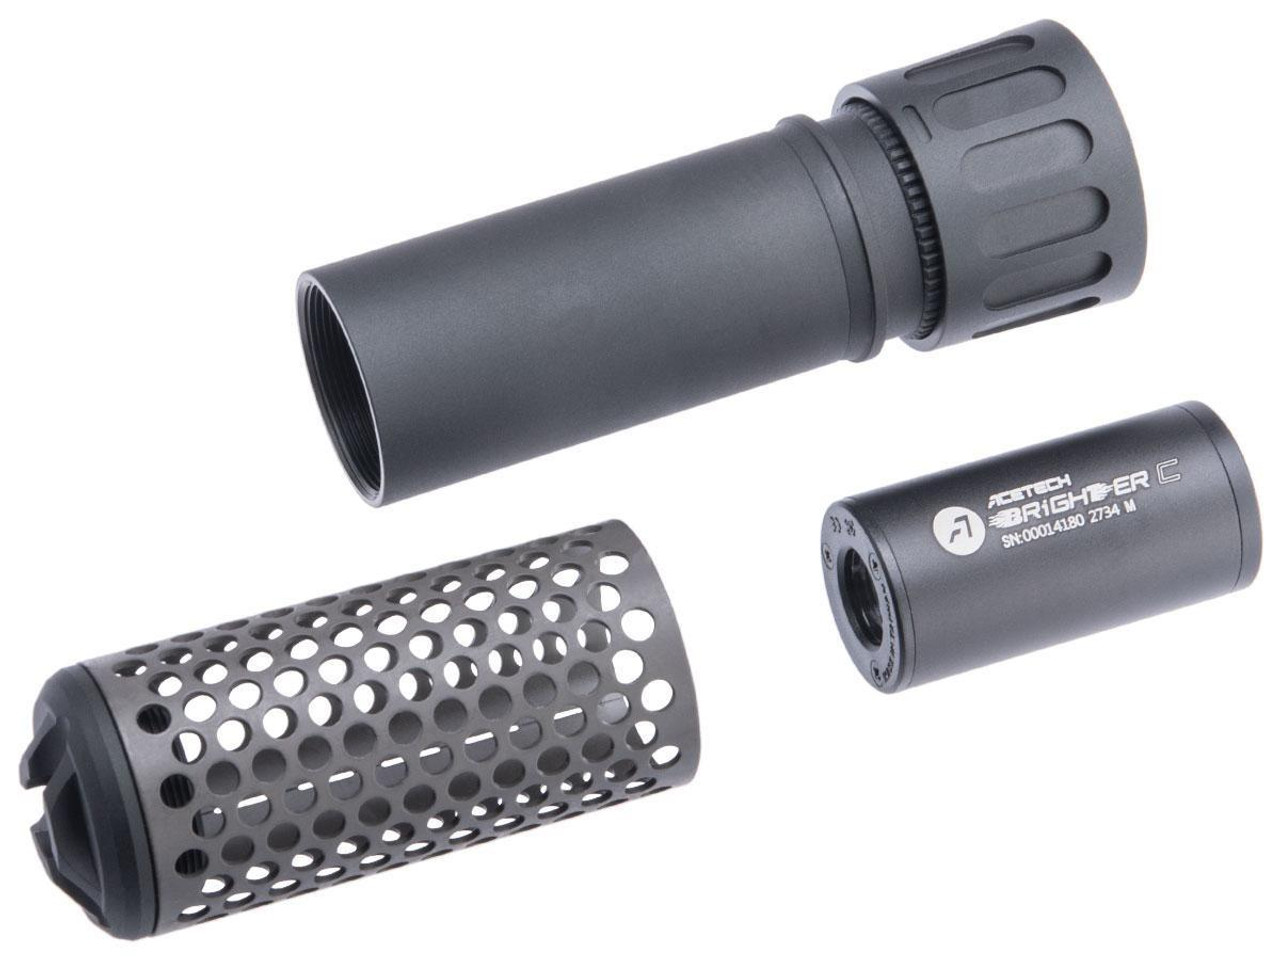 ACETECH AT1000 Airsoft Mock Silencer Tracer Unit – Simple Airsoft